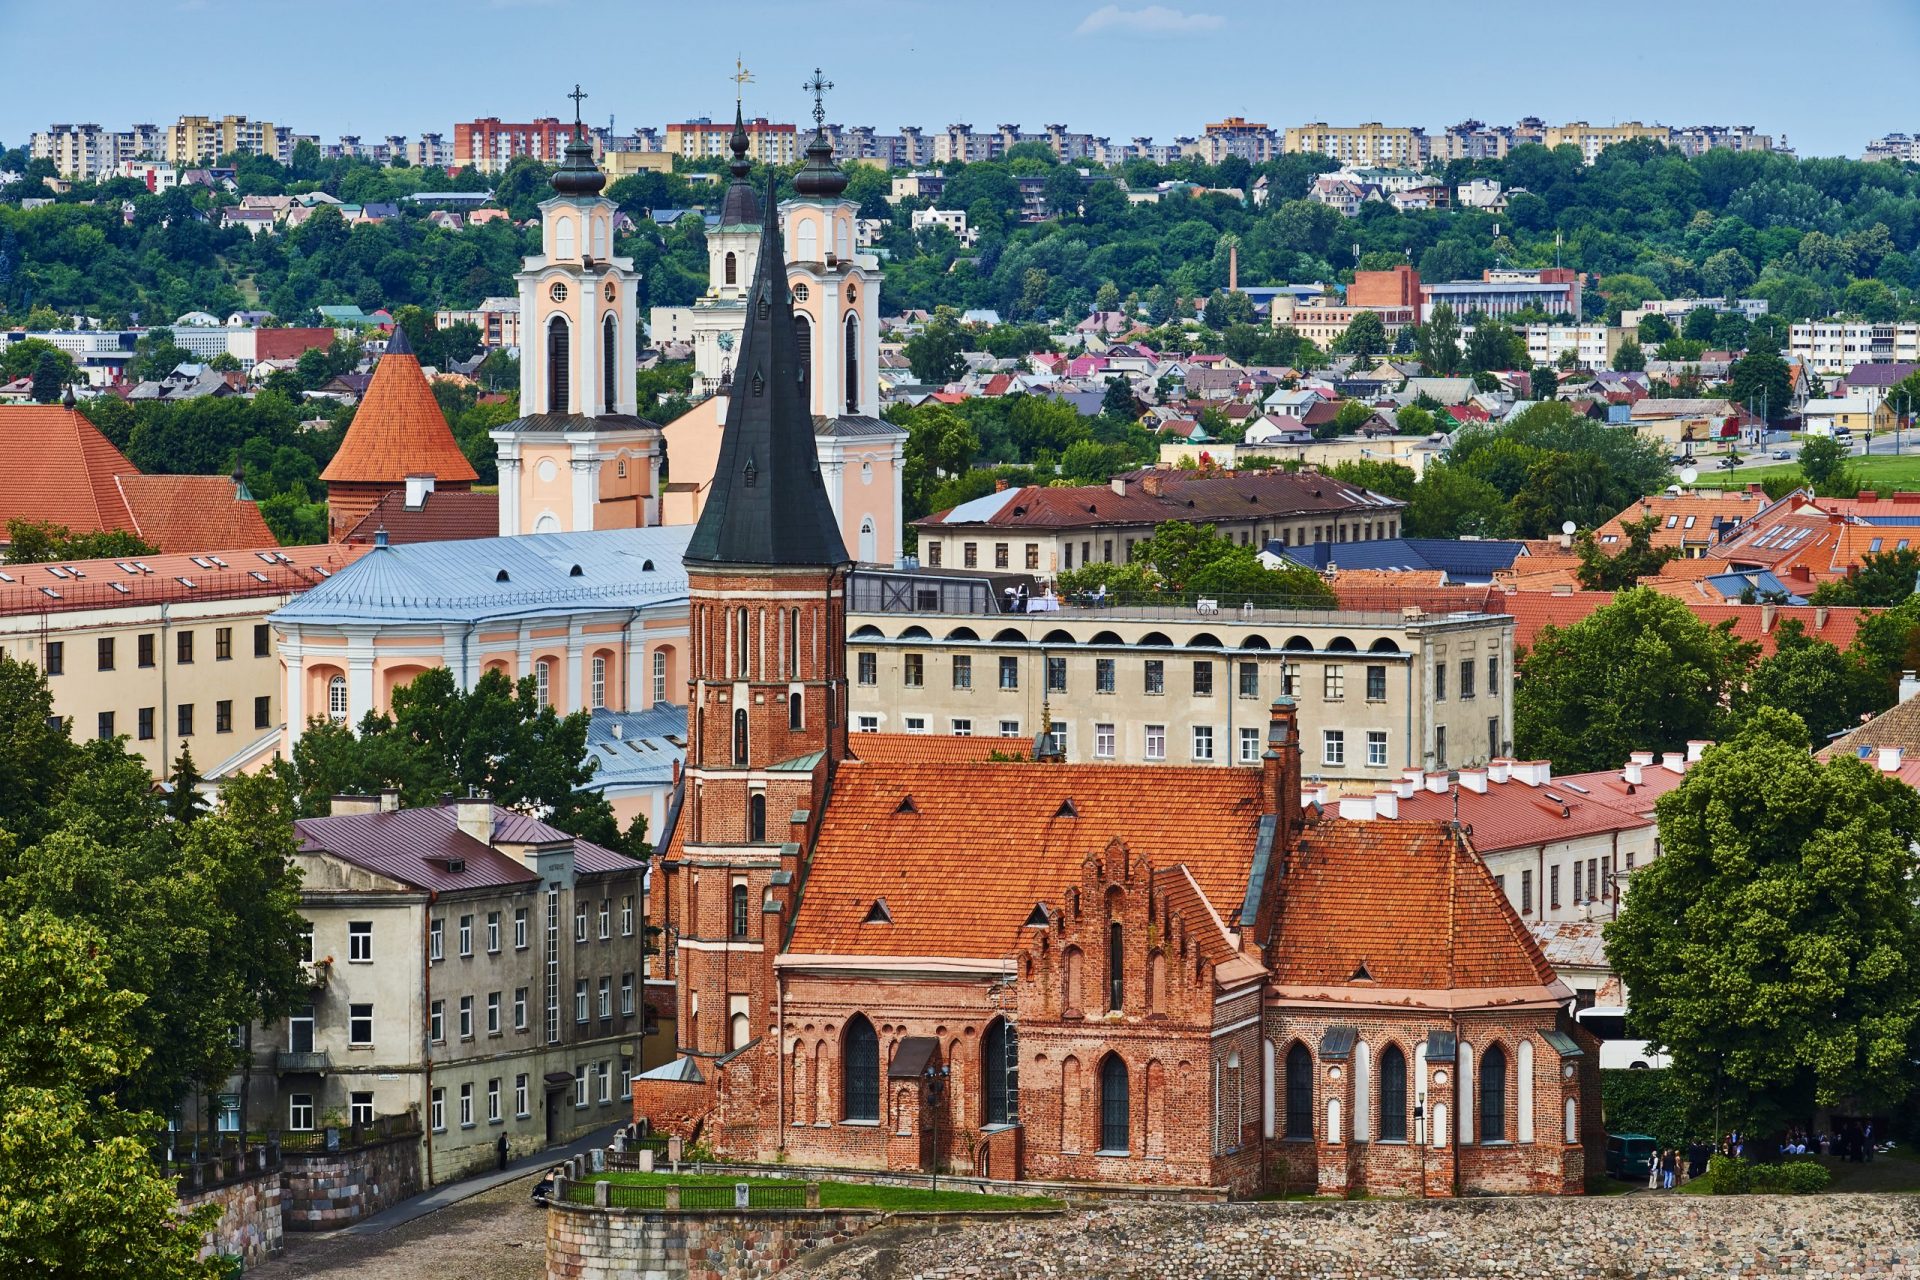 <p>Kaunas is the second largest city in Lithuania. Less touristy and more authentic than Vilnius, the capital, Kaunas is worth the detour.</p>